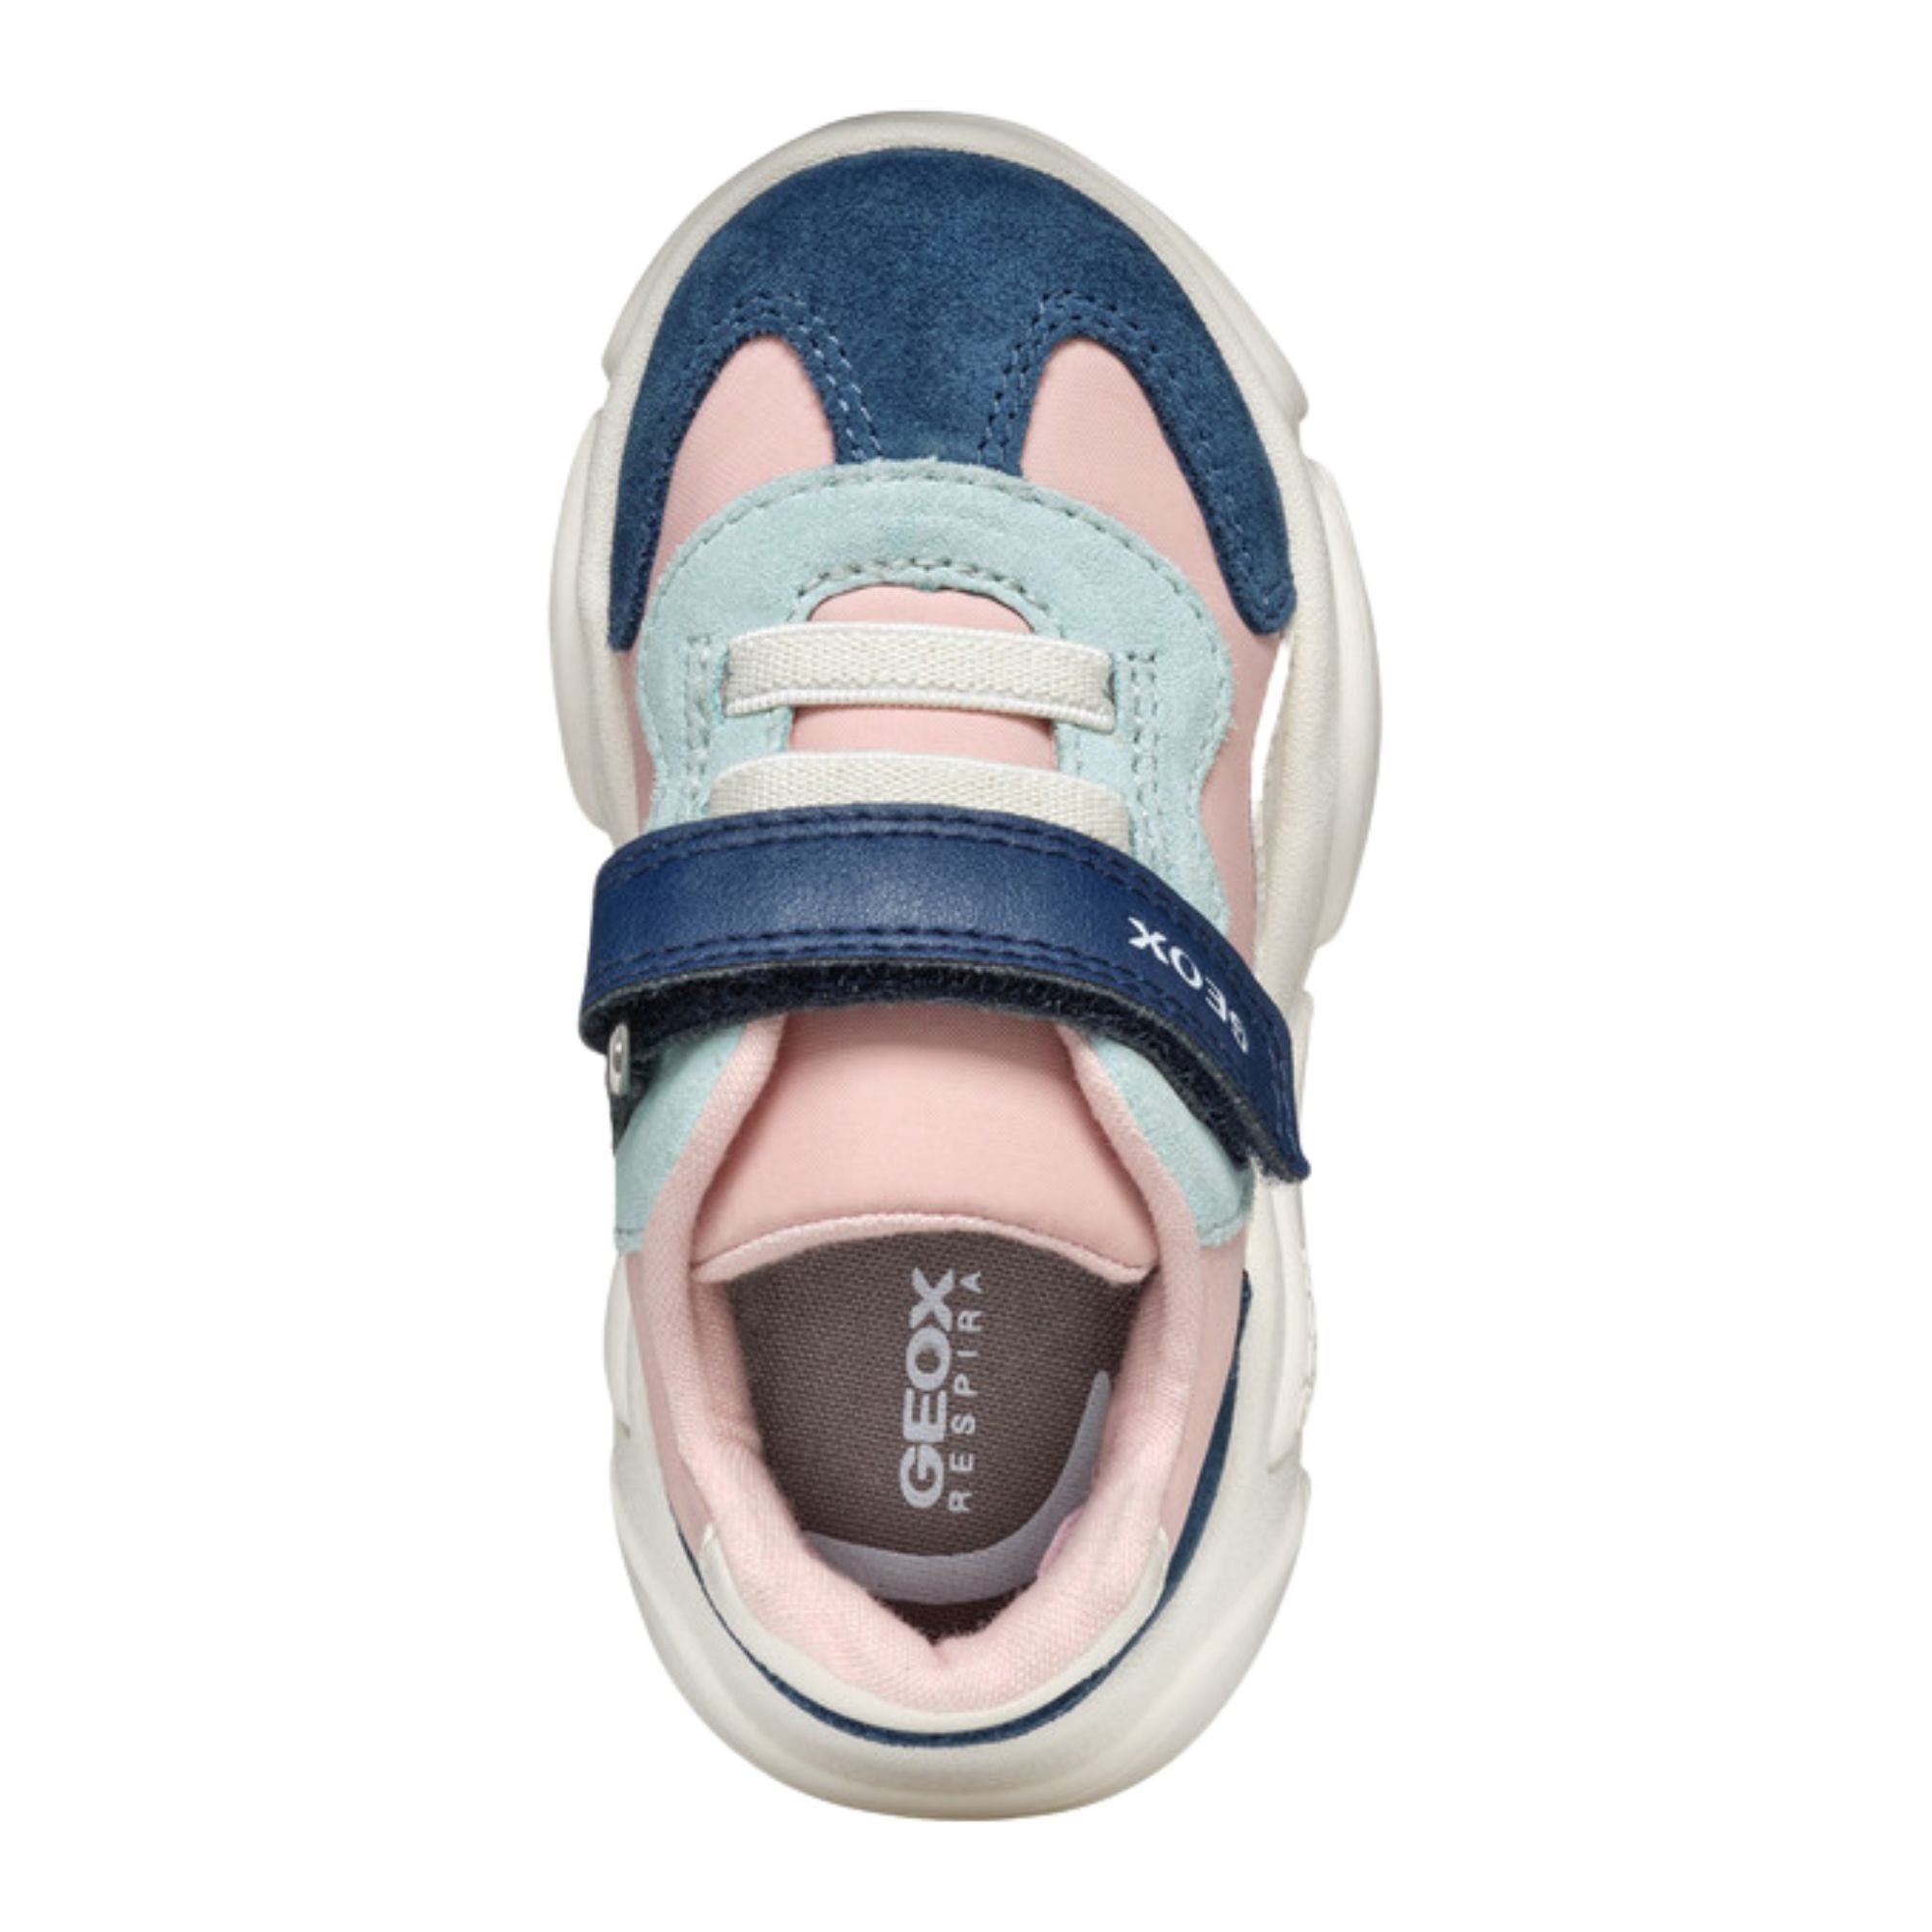 Geox Baby Girl Ciufciuf Pink Sneakers